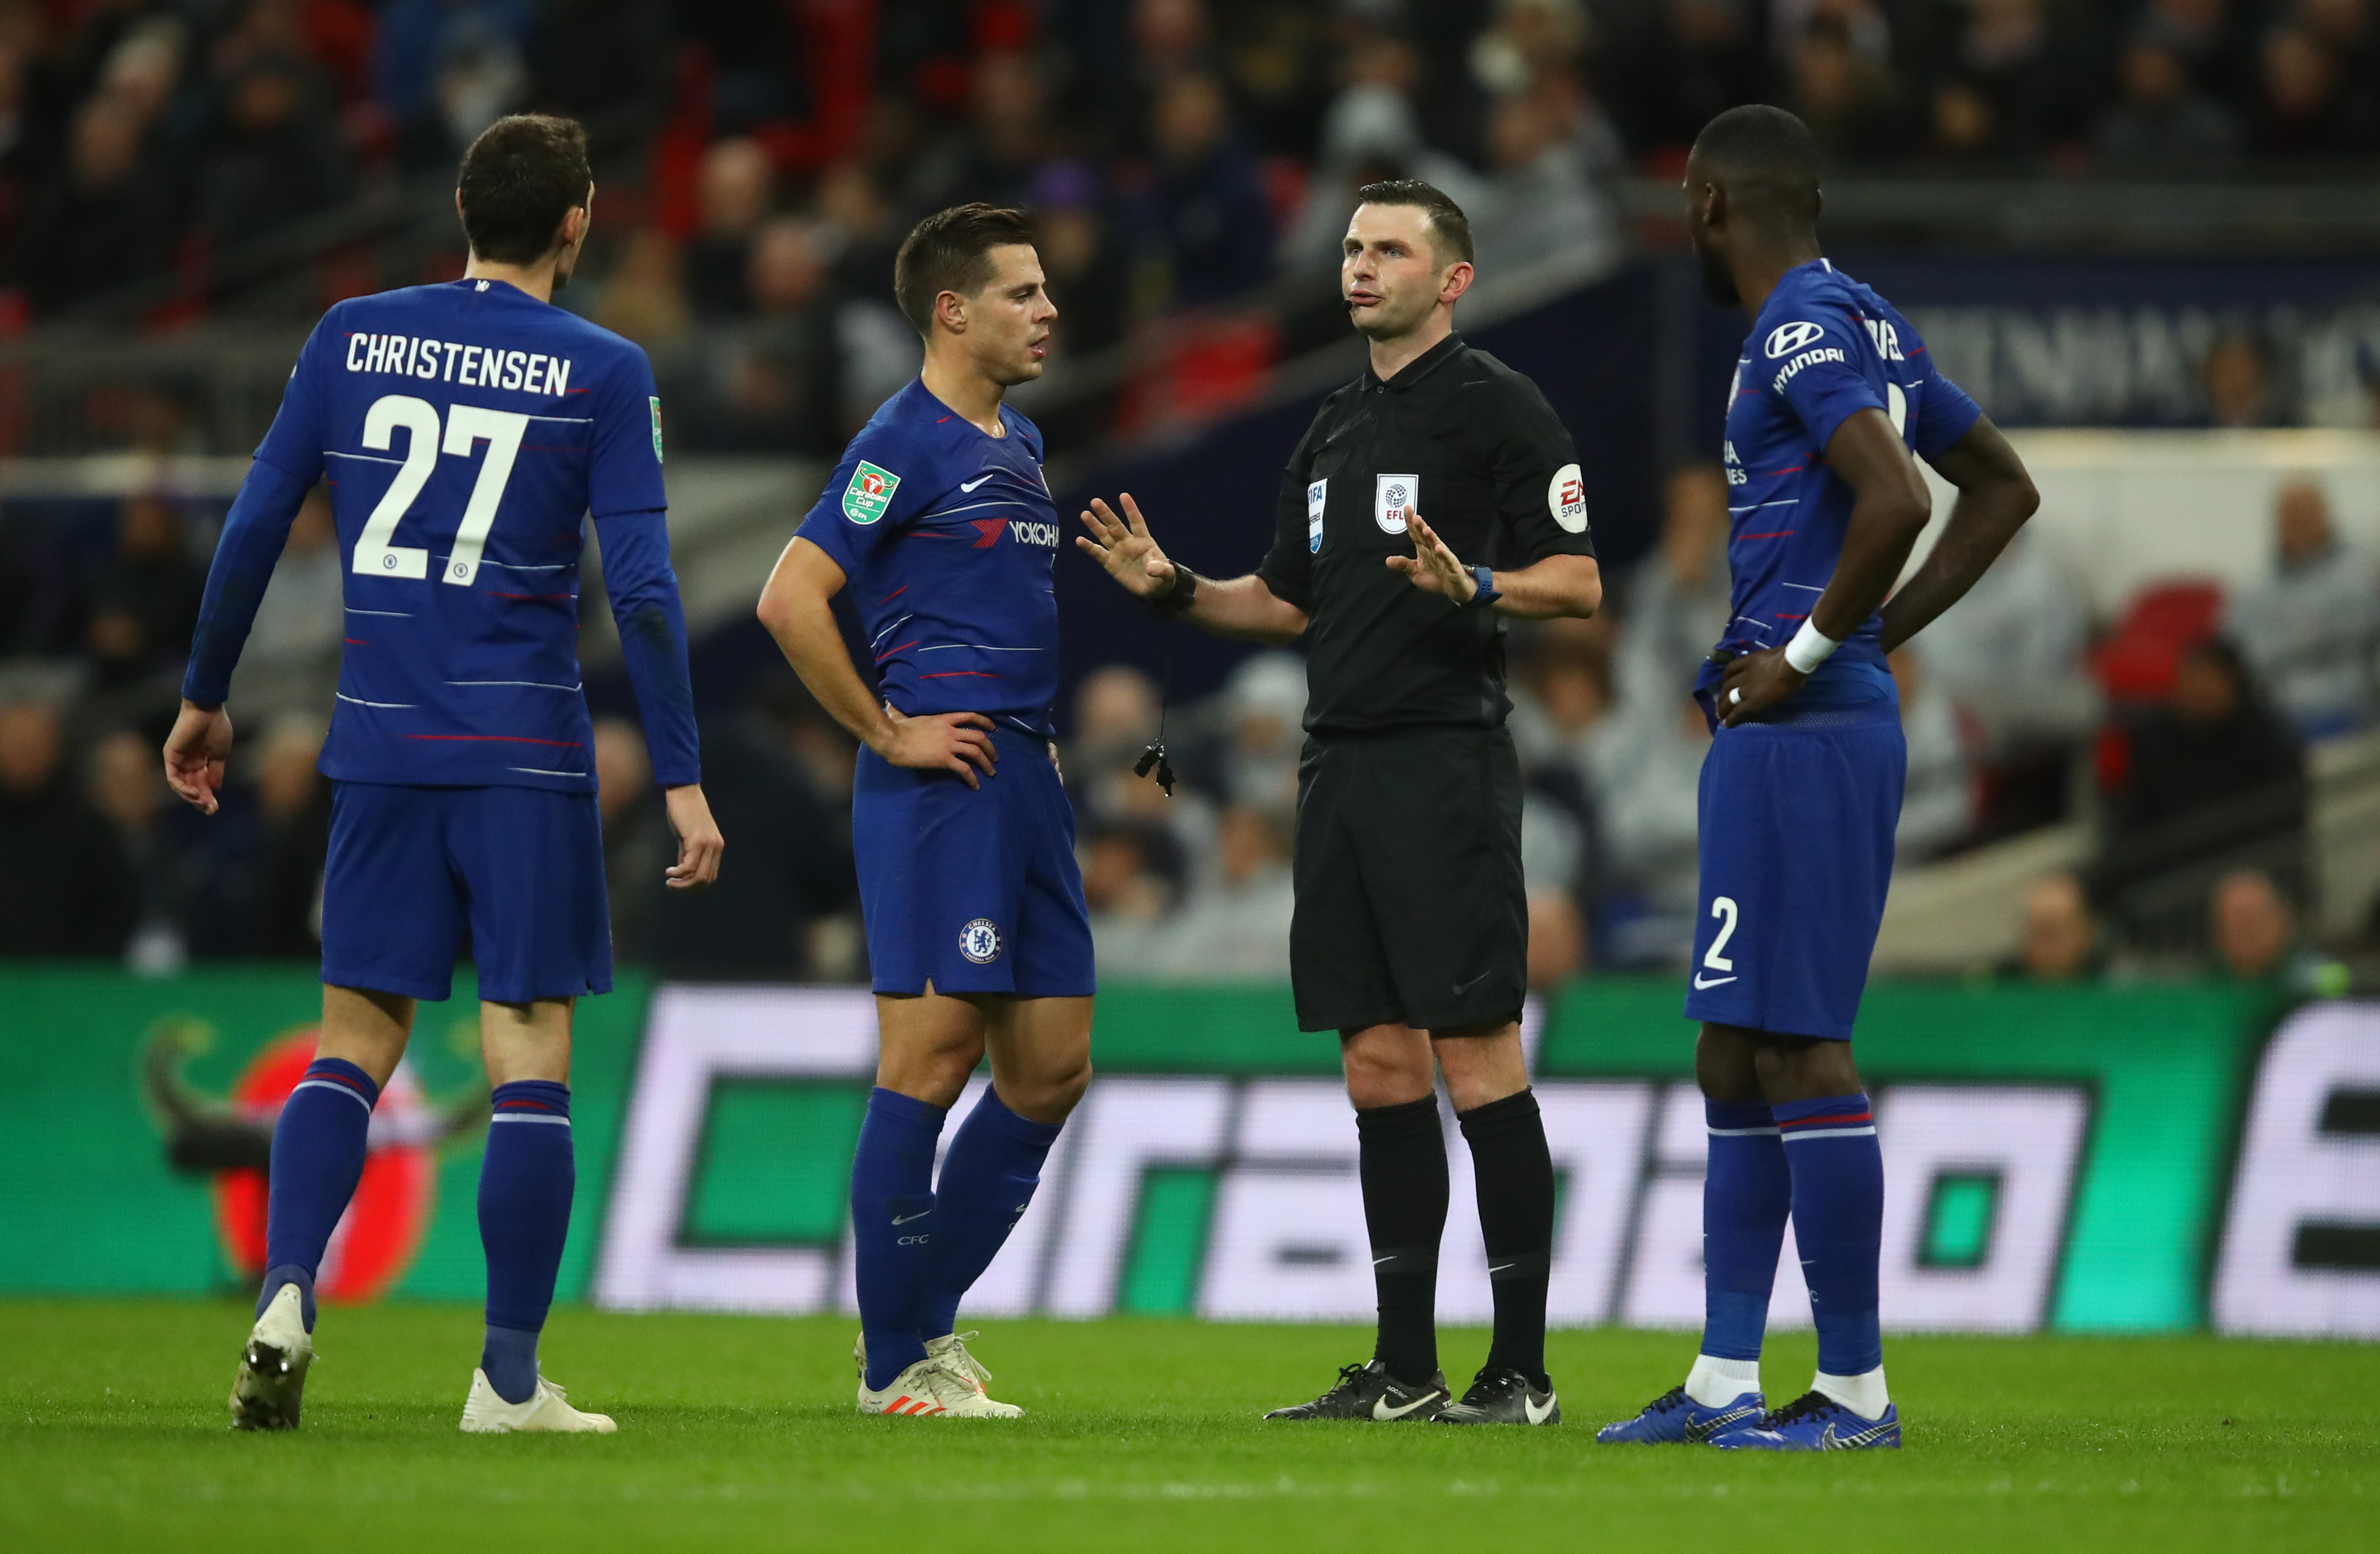 LONDON, ENGLAND - JANUARY 08: Referee Michael Oliver speaks to Cesar Azpilicueta of Chelsea as he waits for the VAR during the Carabao Cup Semi-Final First Leg match between Tottenham Hotspur and Chelsea at Wembley Stadium on January 8, 2019 in London, England.  (Photo by Julian Finney/Getty Images)